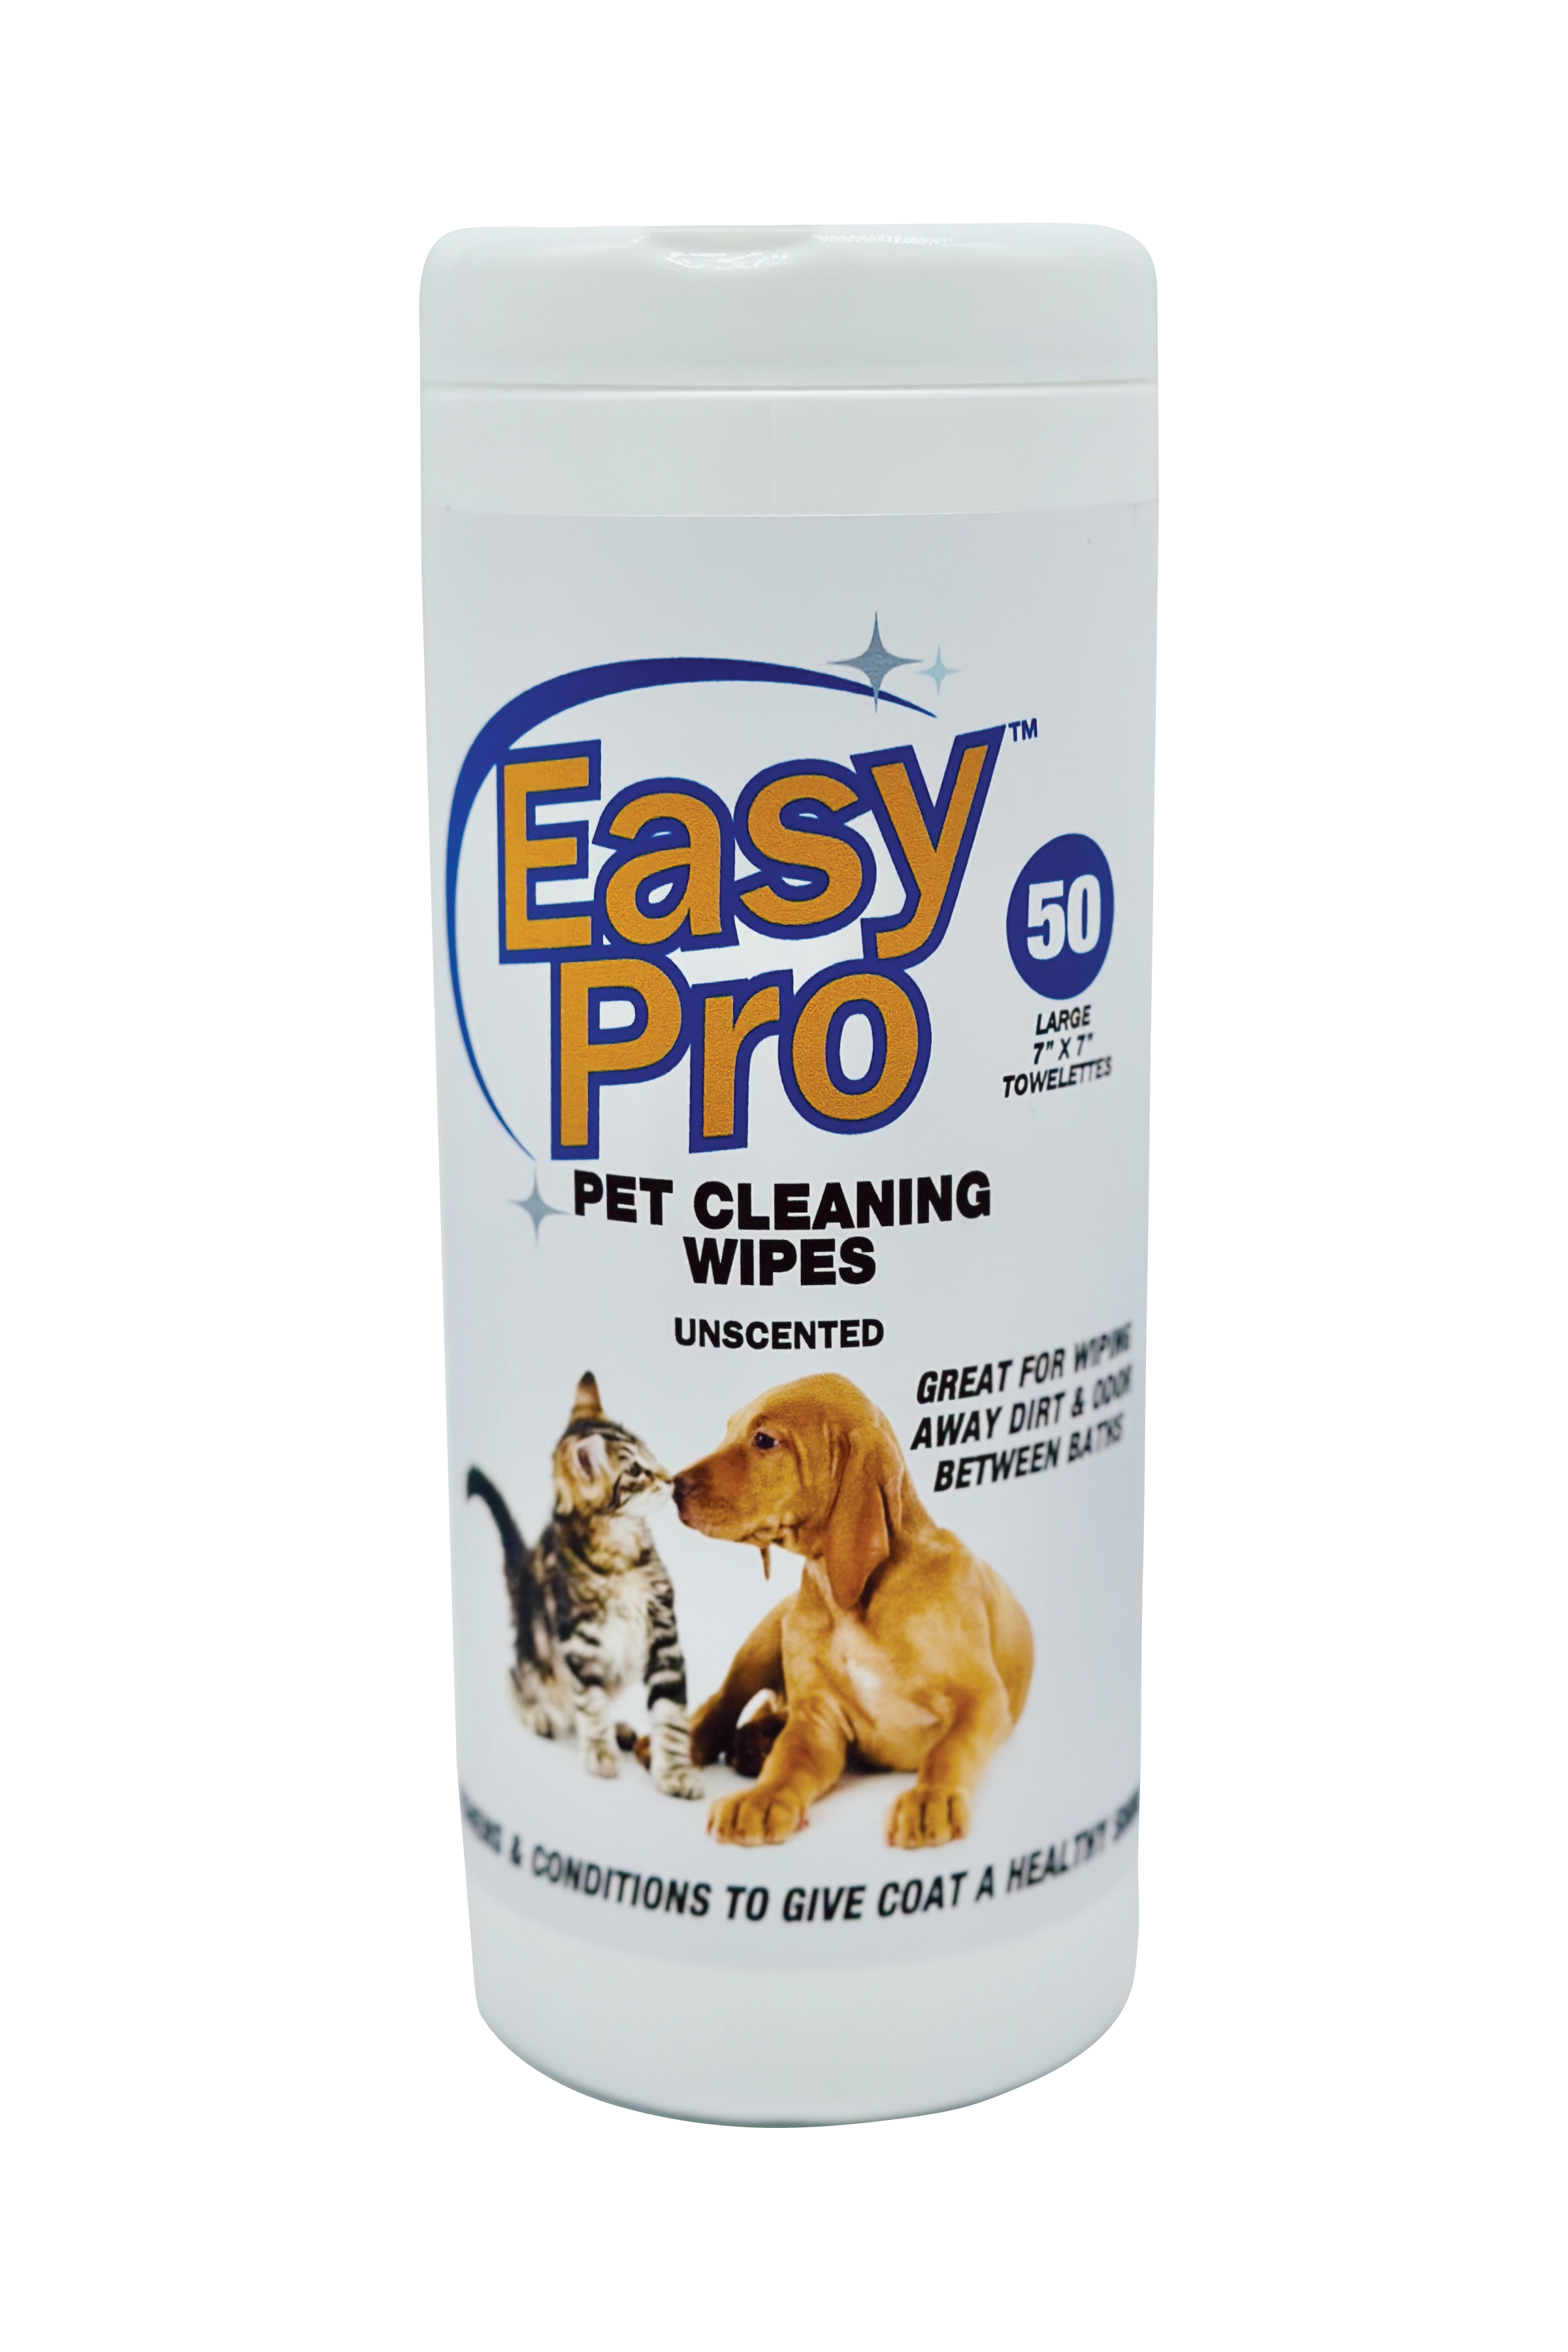 Easy Pro Pet Cleaning Wipes - Unscented - 50ct, 8 canister per case